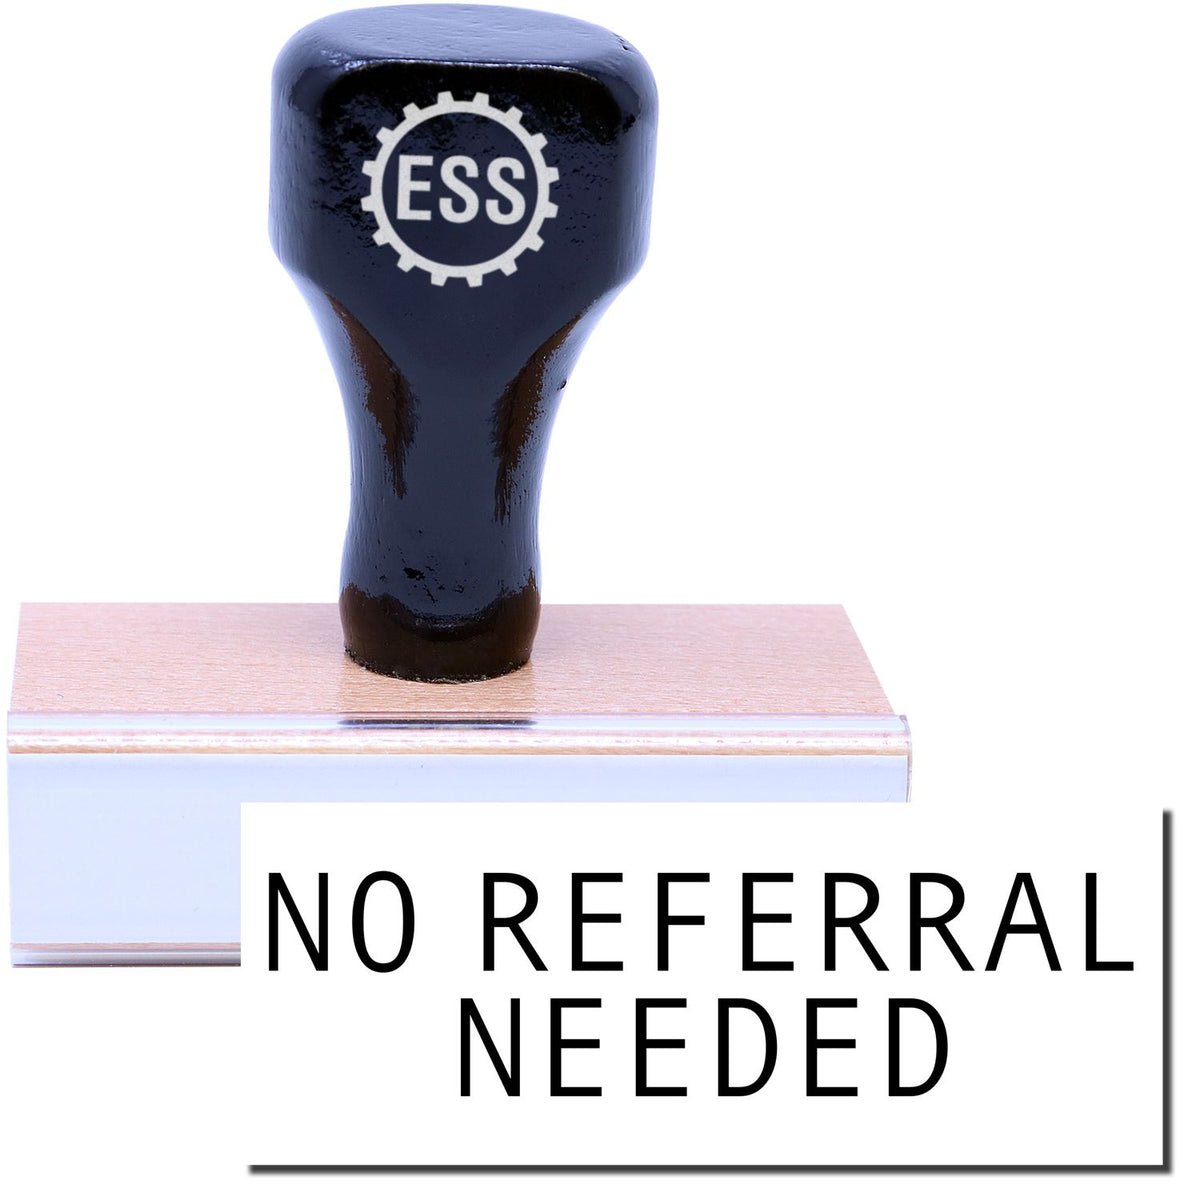 A stock office rubber stamp with a stamped image showing how the text &quot;NO REFERRAL NEEDED&quot; is displayed after stamping.